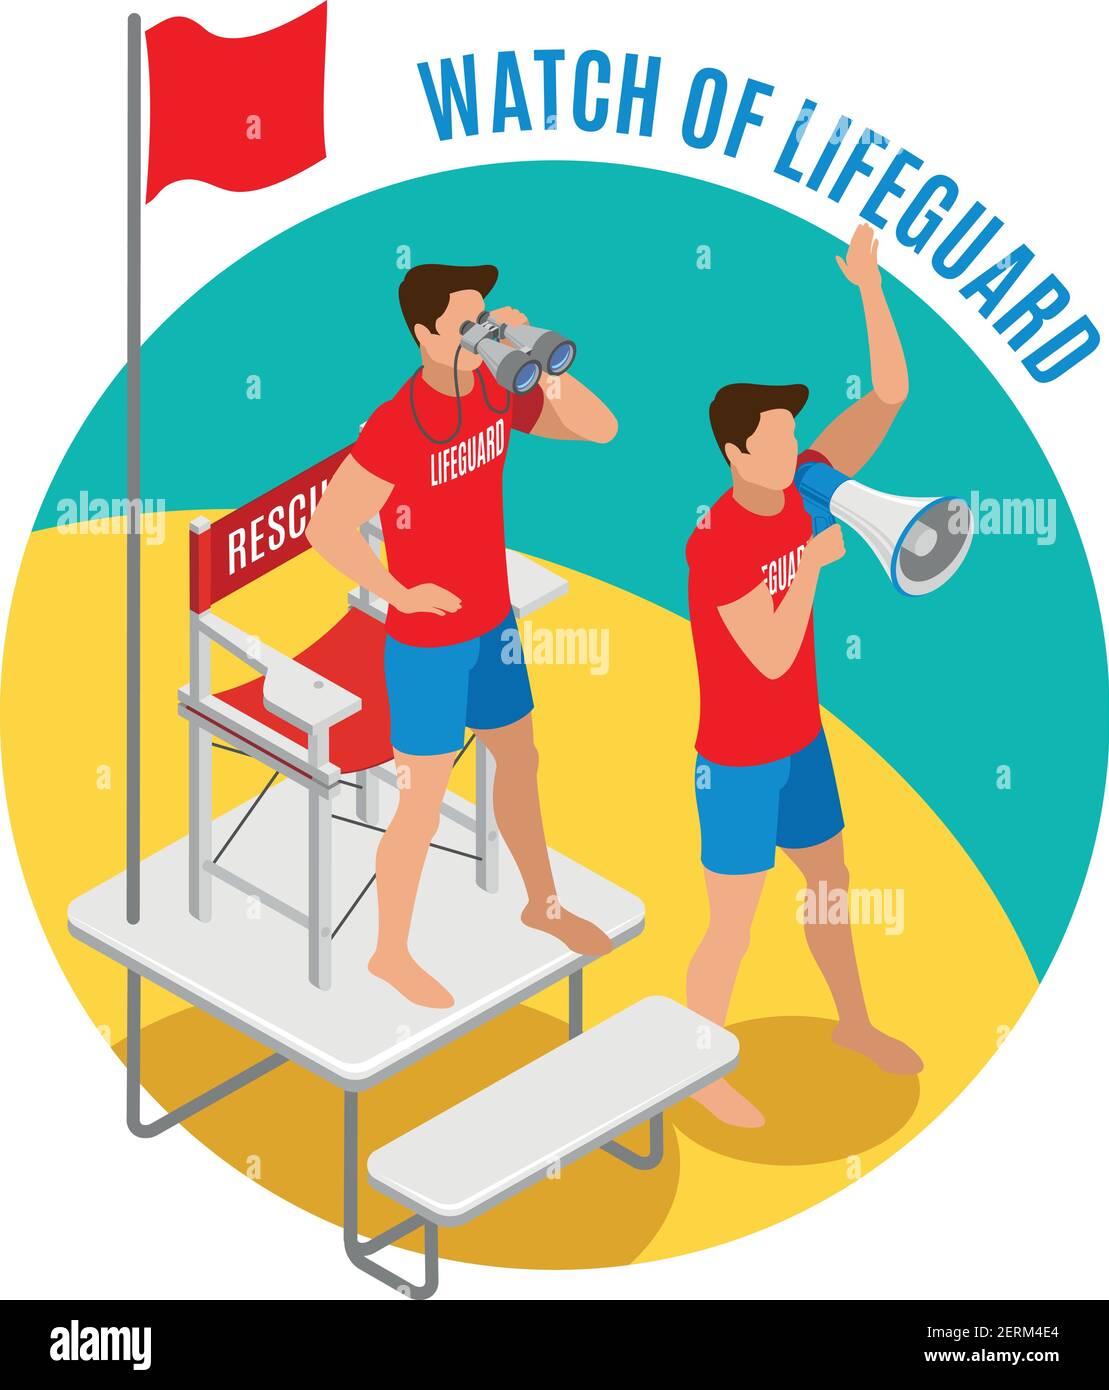 Watch of lifeguard round design concept with two savers near rescue chair holding binocular and loudspeaker isometric vector illustration Stock Vector